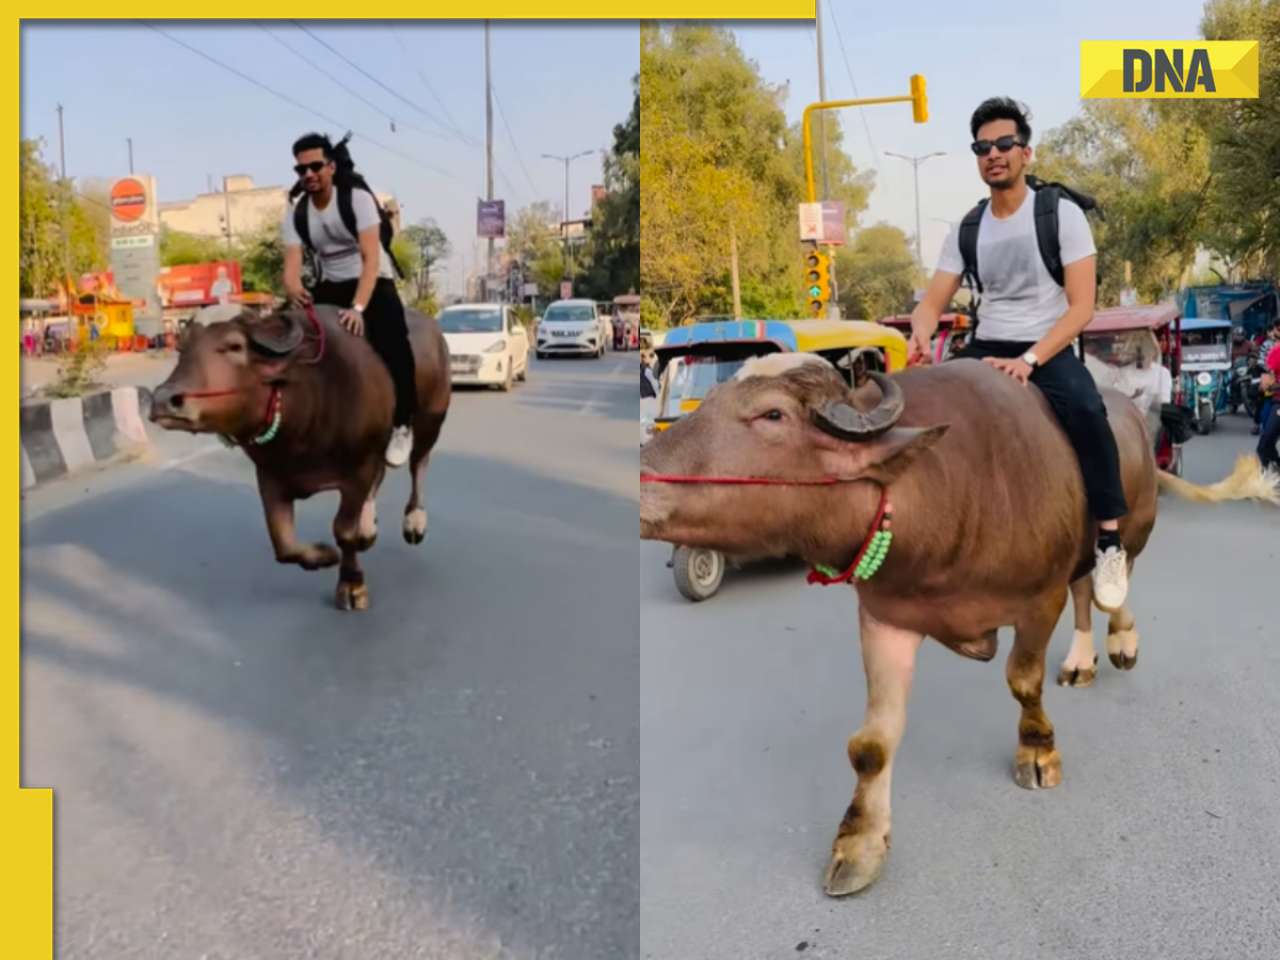 Man rides bull amidst bustling road, video goes viral with 41 million views